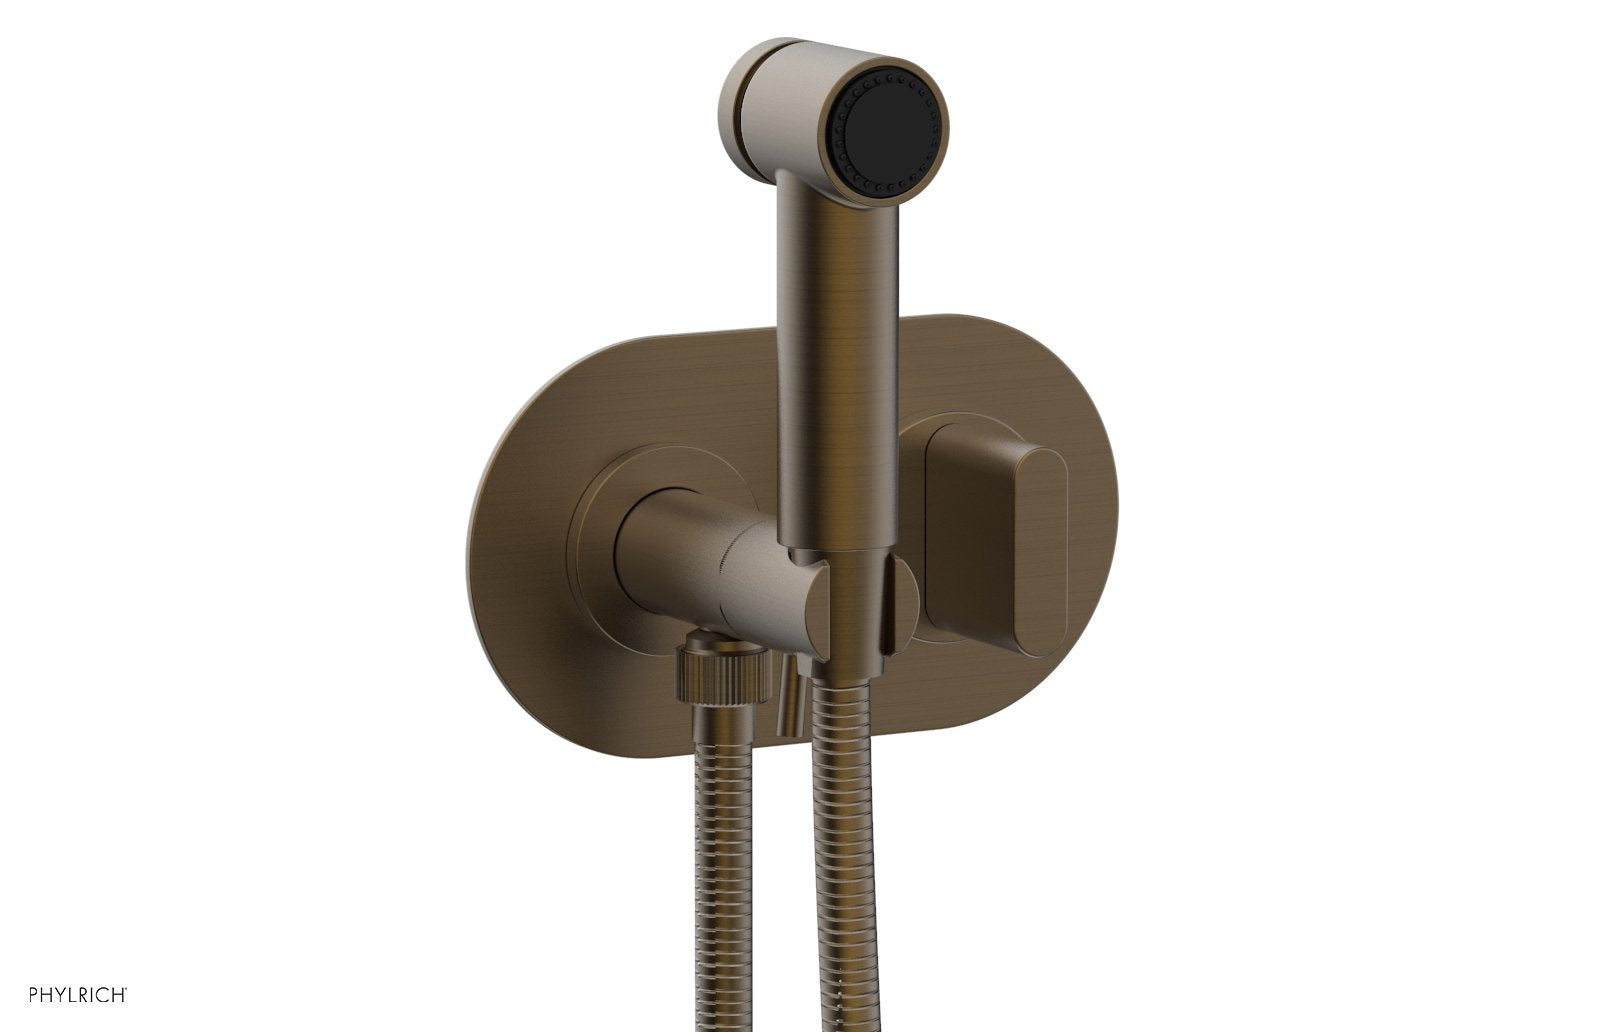 Phylrich ROND Wall Mounted Bidet, Blade Handle